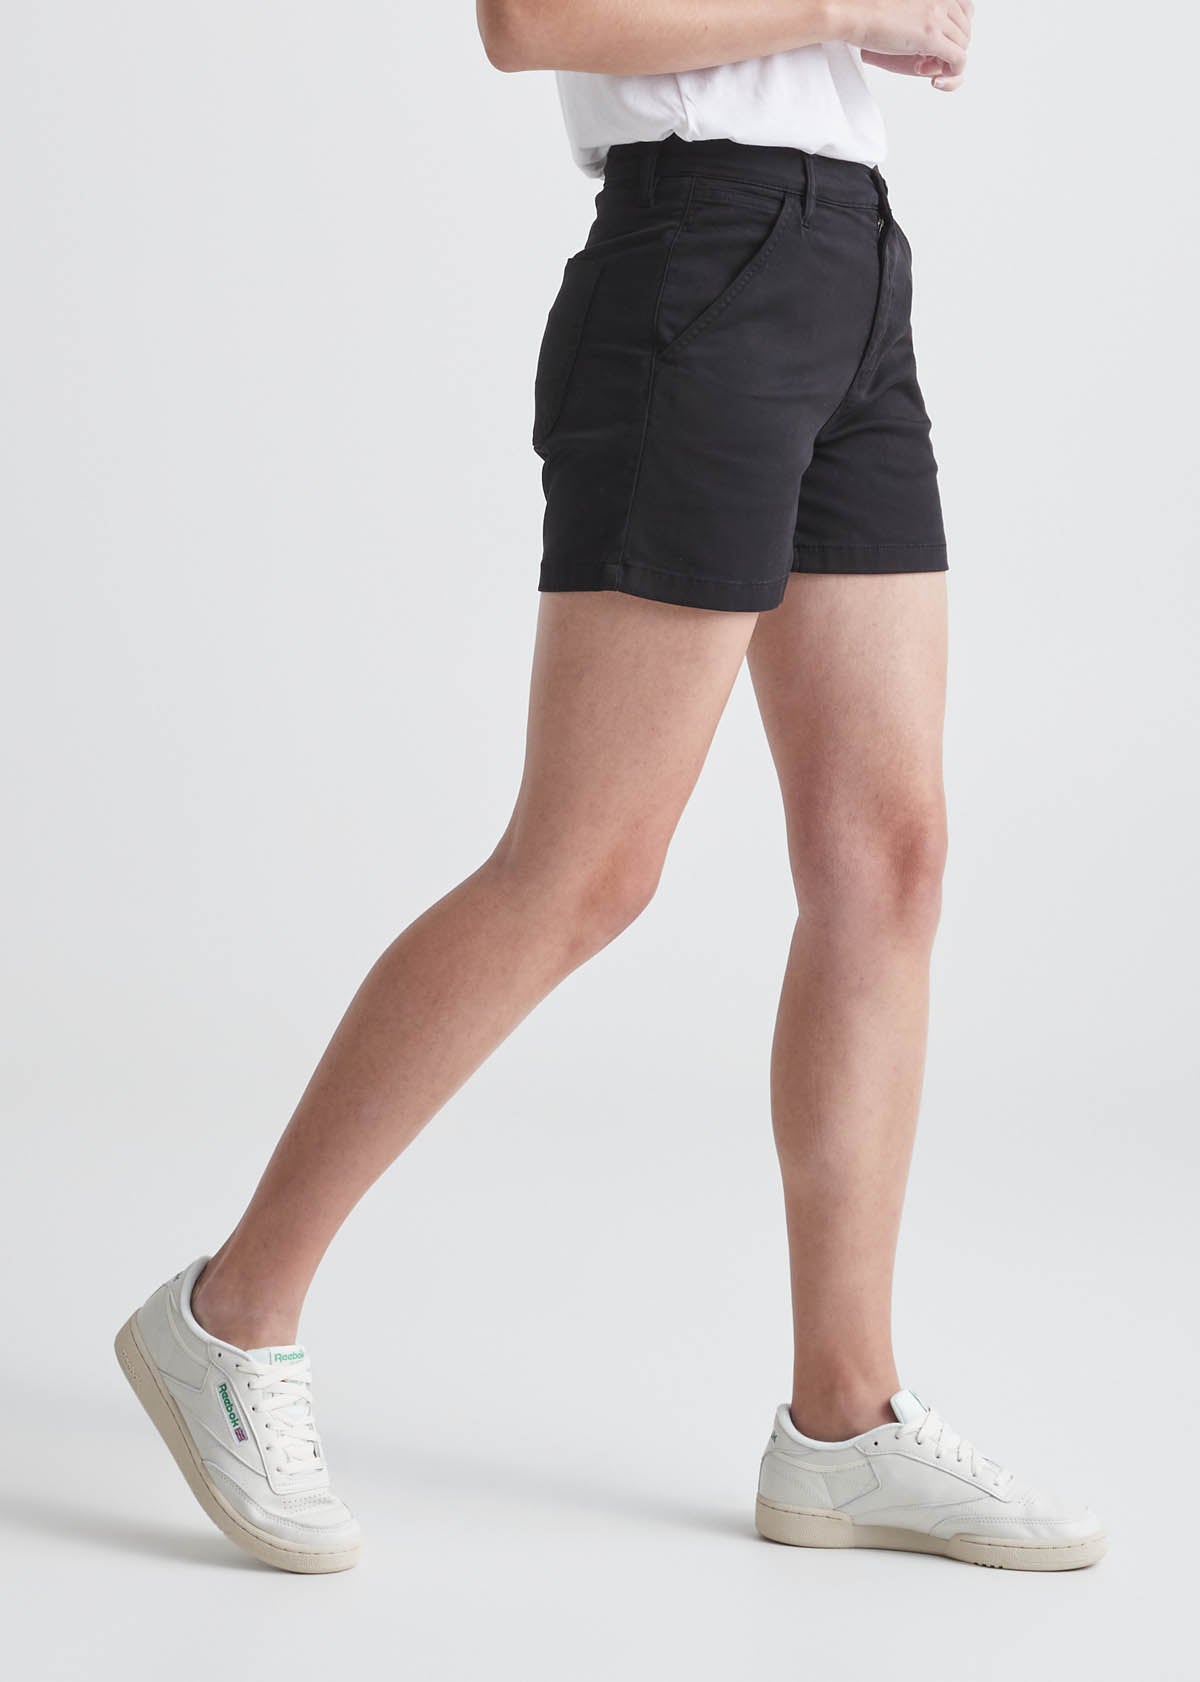 Women's Stretch Twill Shorts,Quick Dry Hiking Athletic Shorts with